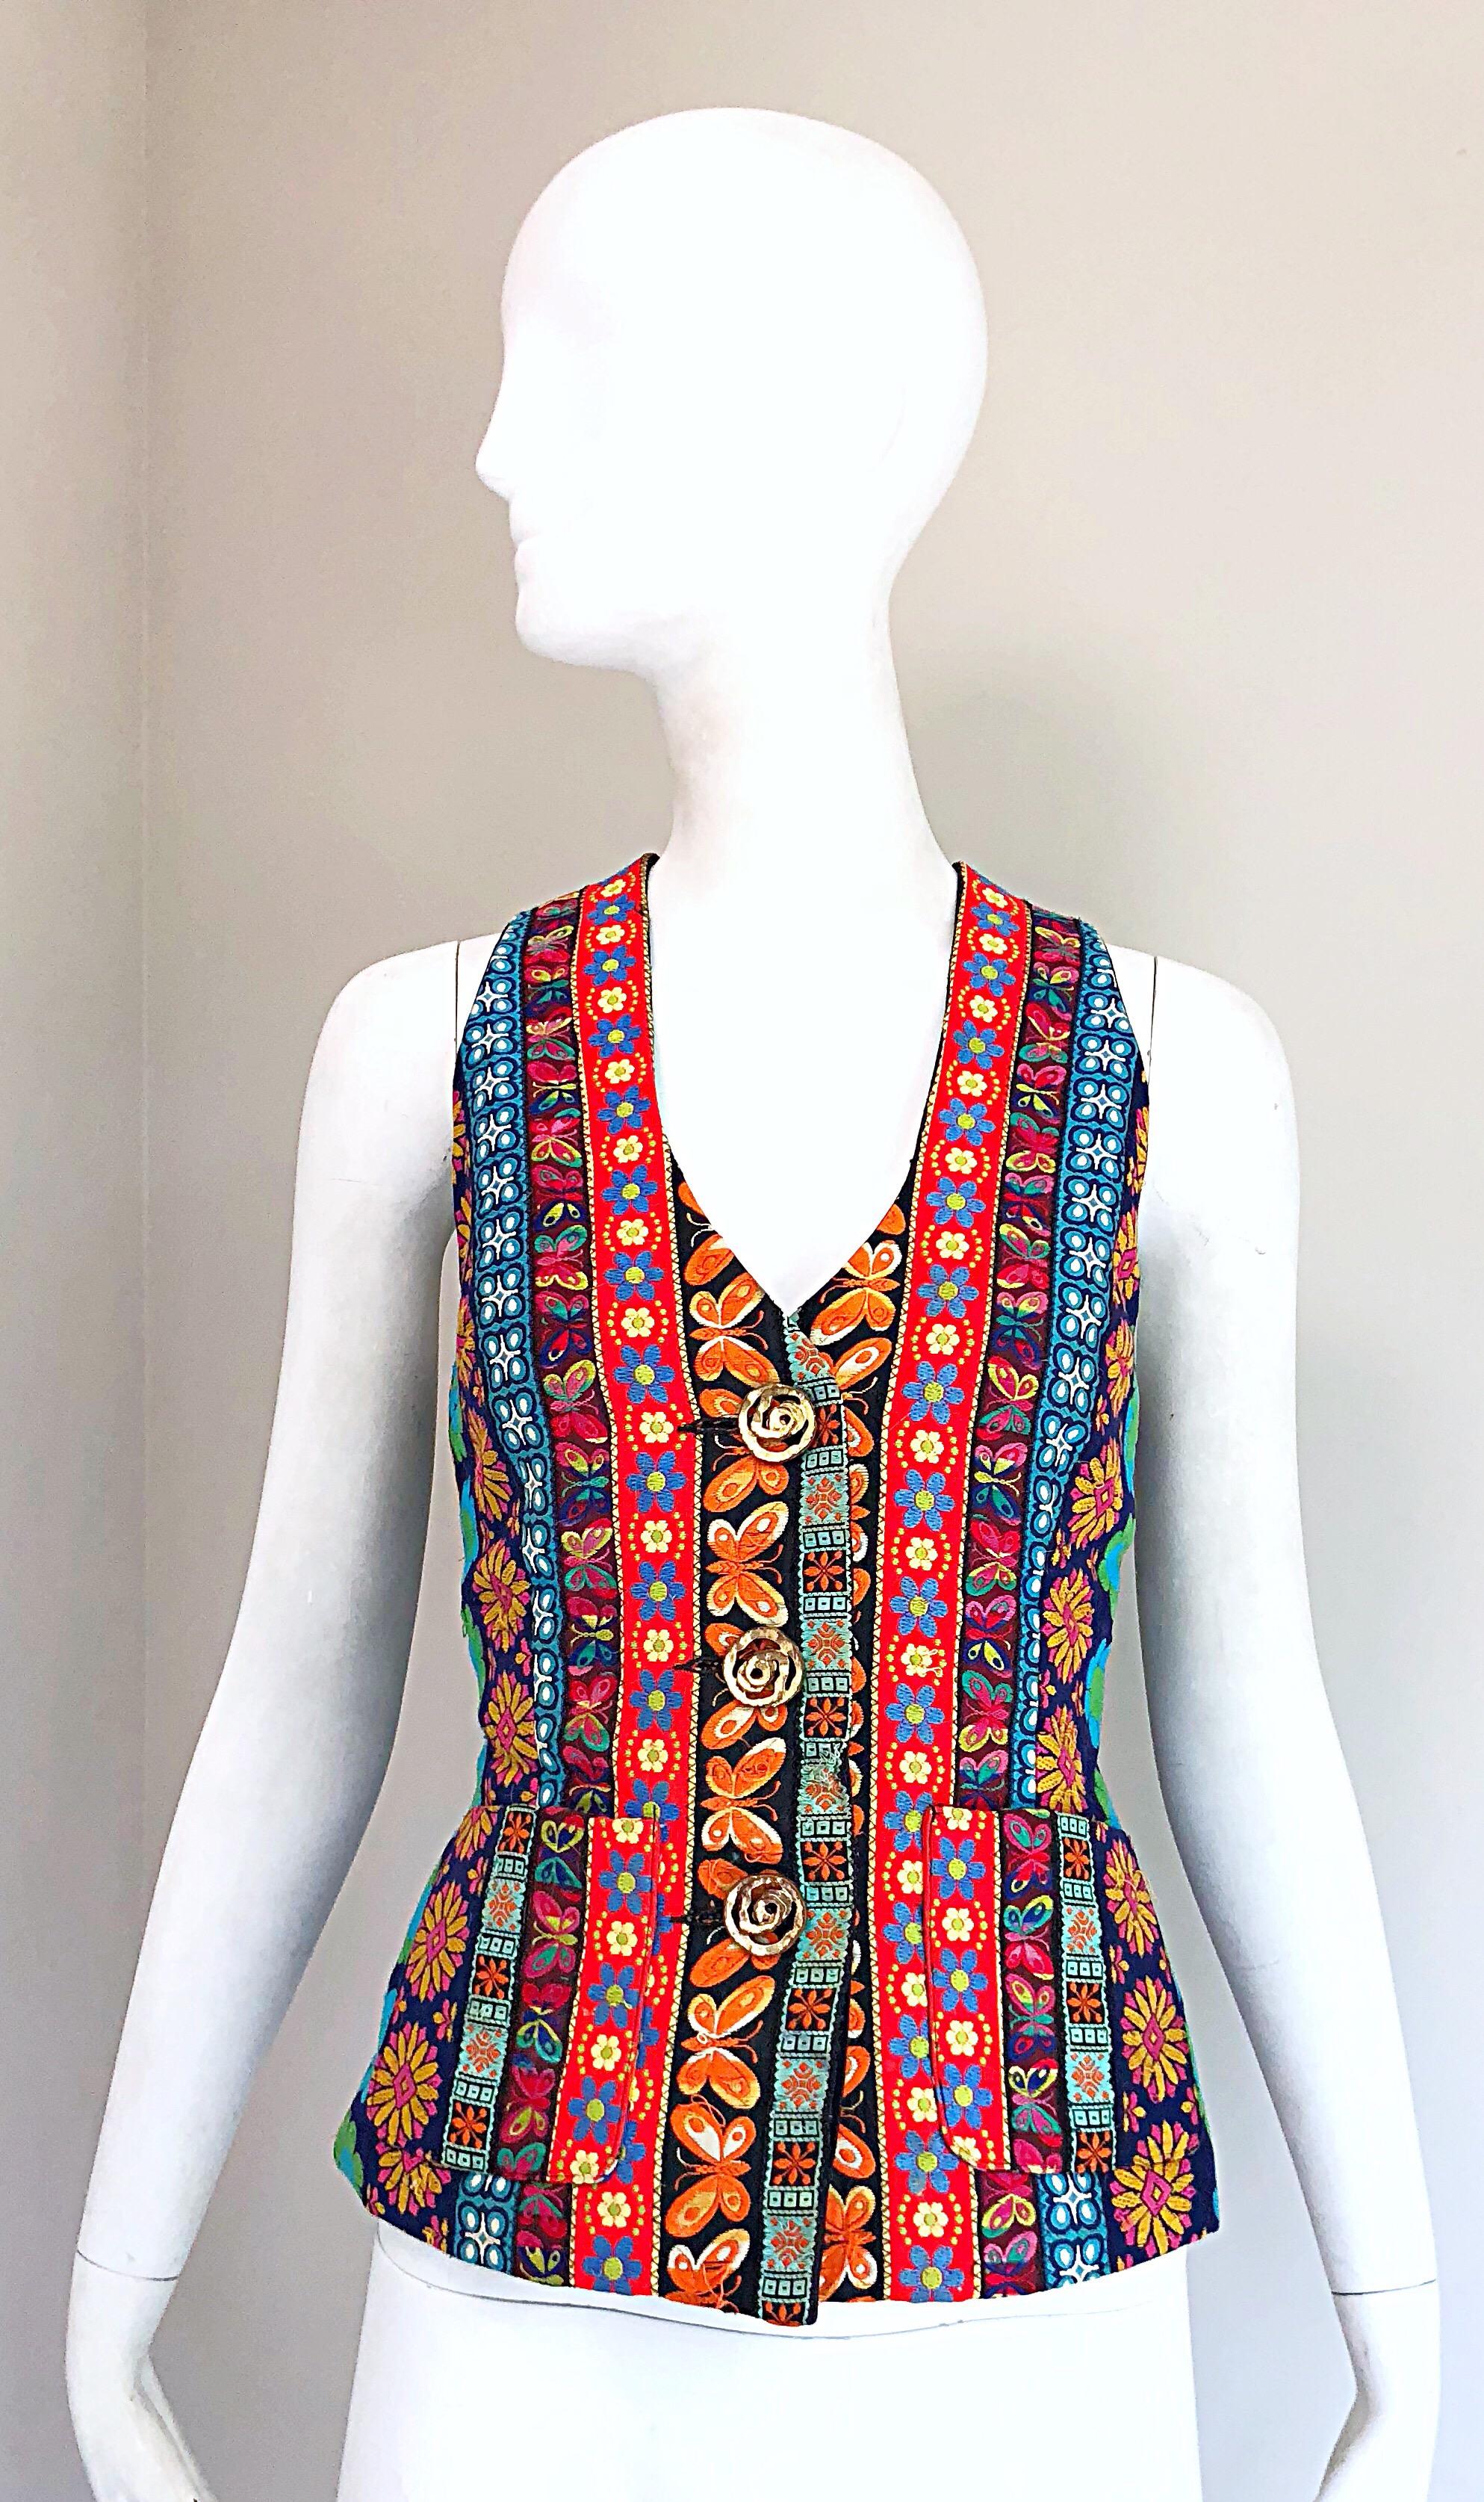 Rare 90s TODD OLDHAM boho hippie chic butterflies + flowers embroidered silk waist coat / vest! Tons of intricate hand embroidery throughout. Large hammered gold abstract metal buttons up the front. Pocket at each side of the waist. Ties on back